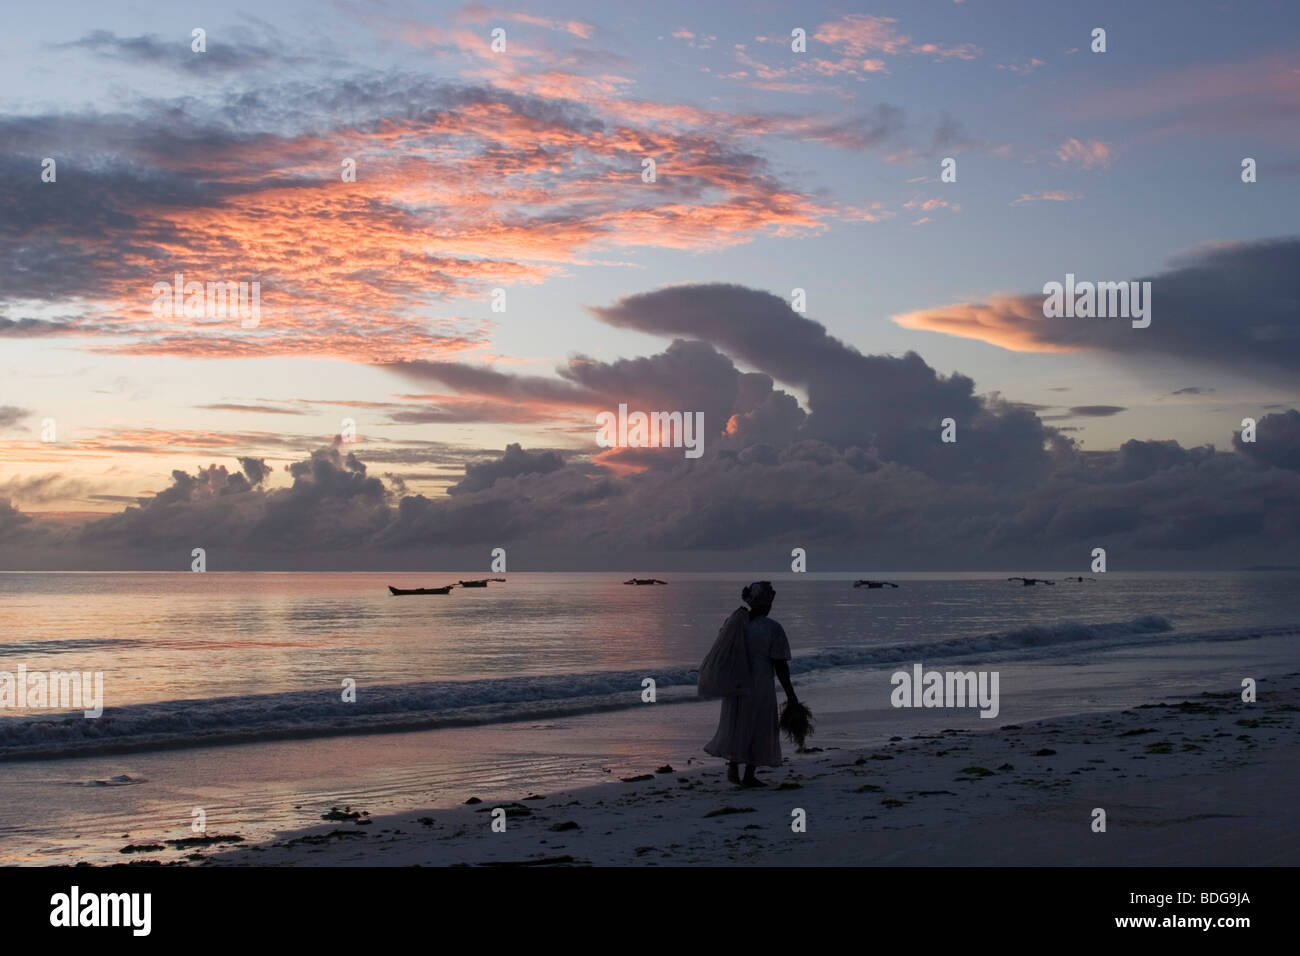 The lone figure of a woman at dawn. Sunrise over the ocean, on the coast at Paje beach, Zanzibar. Stock Photo